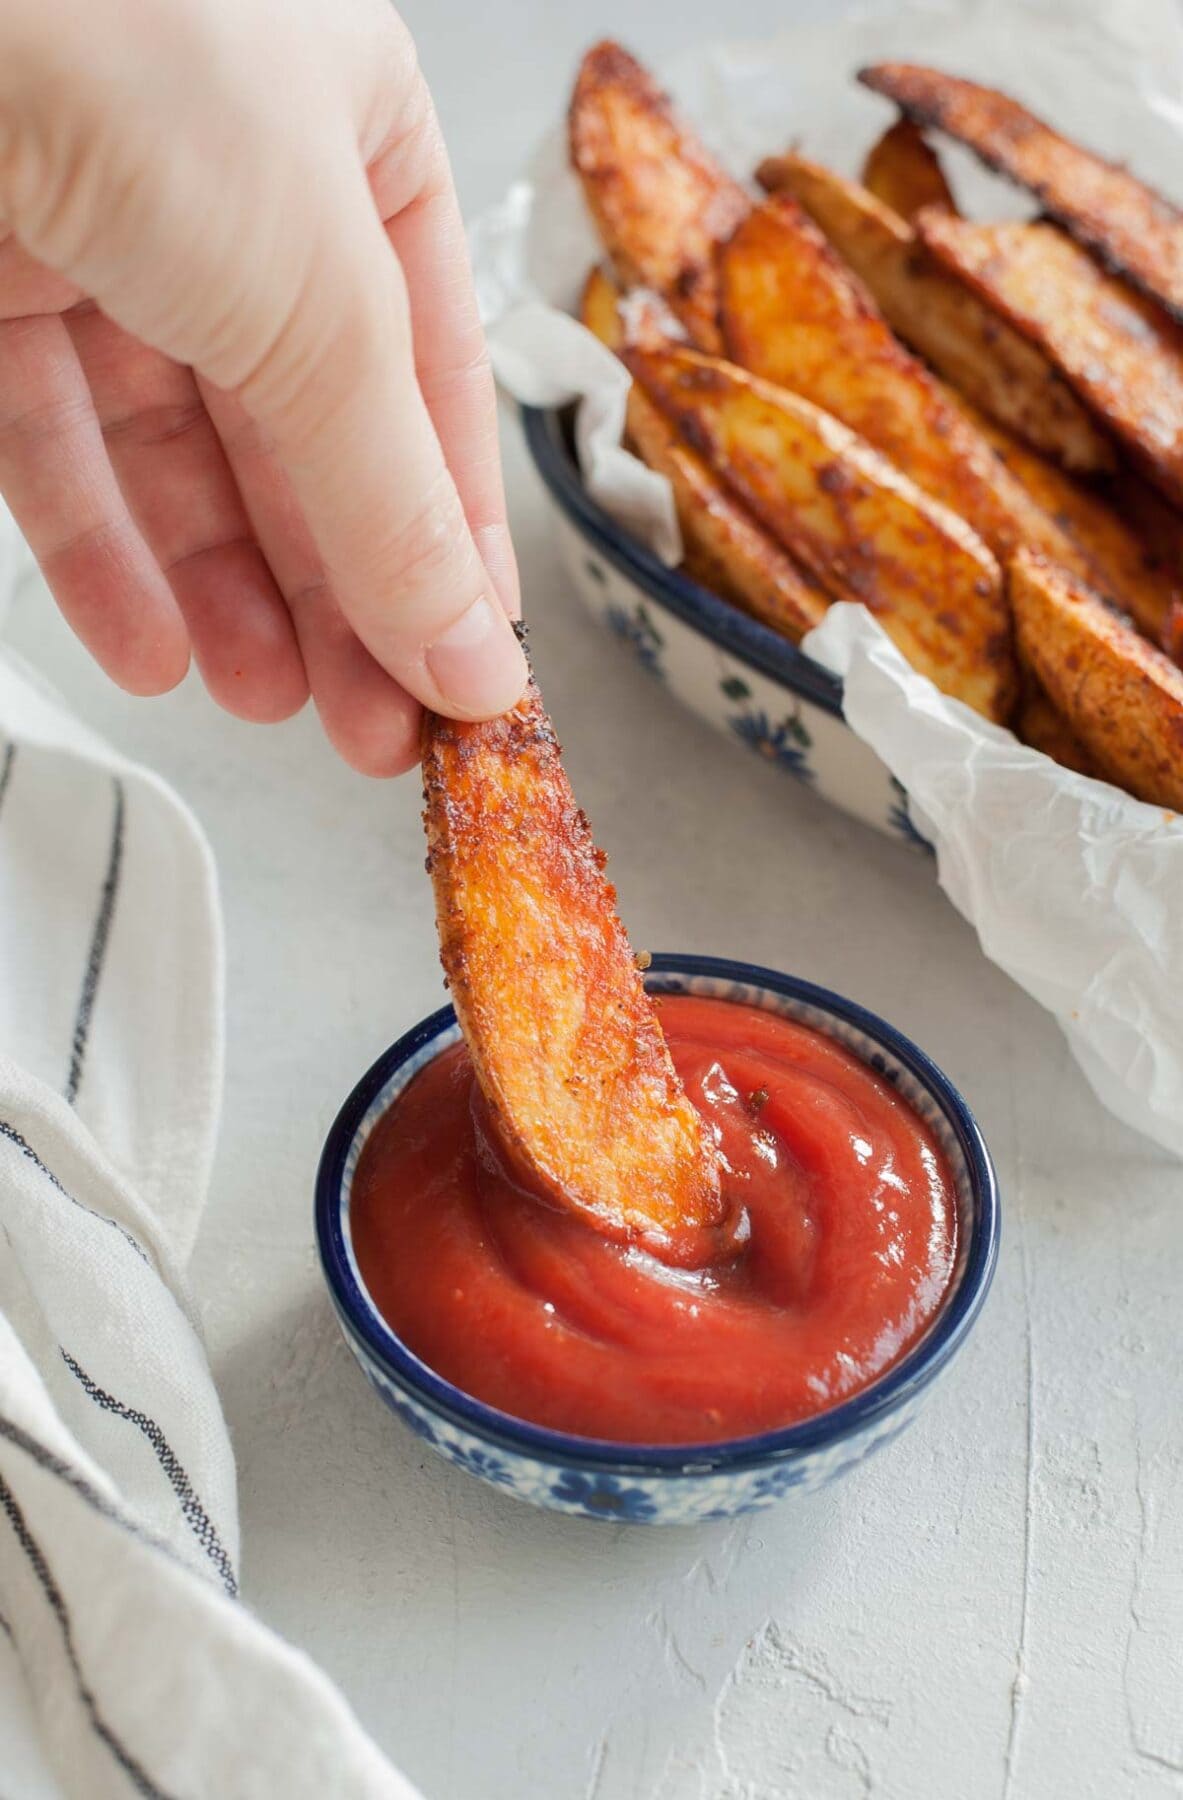 Spicy roasted potato wedges are being dipped in ketchup.